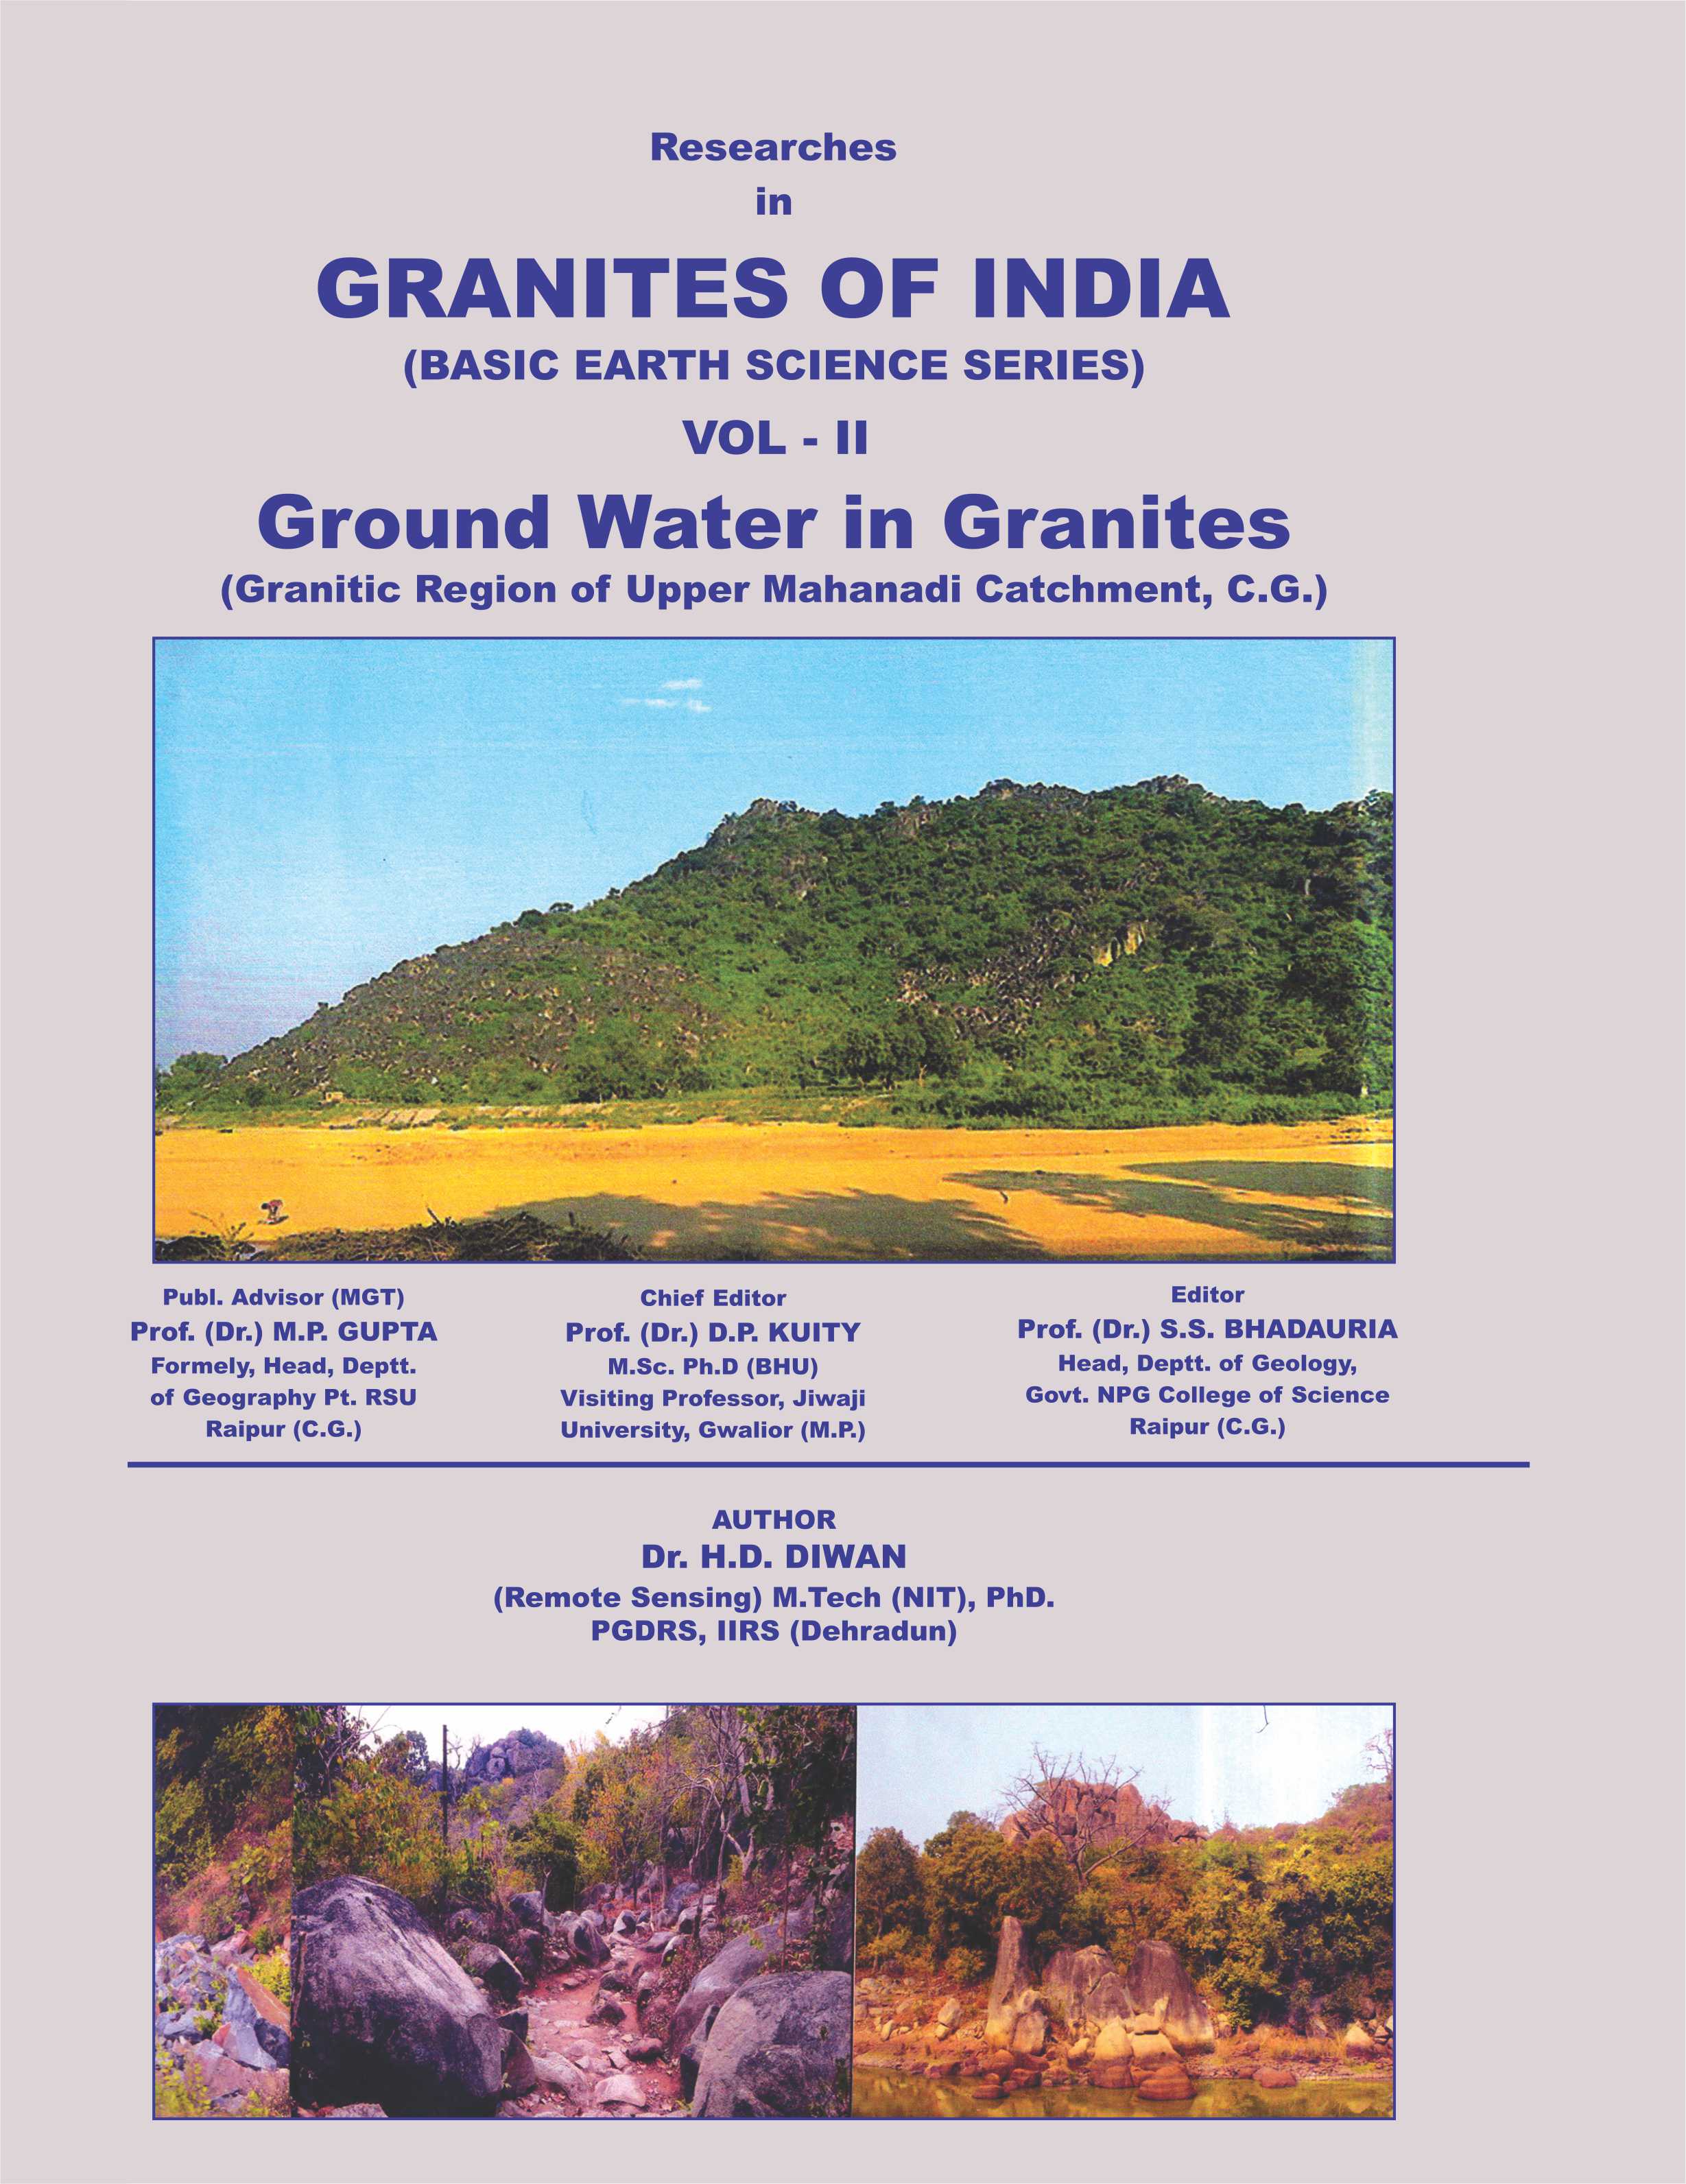 Researches in GRANITES OF INDIA Ground Water in Granites (Basic Earth Science Series)